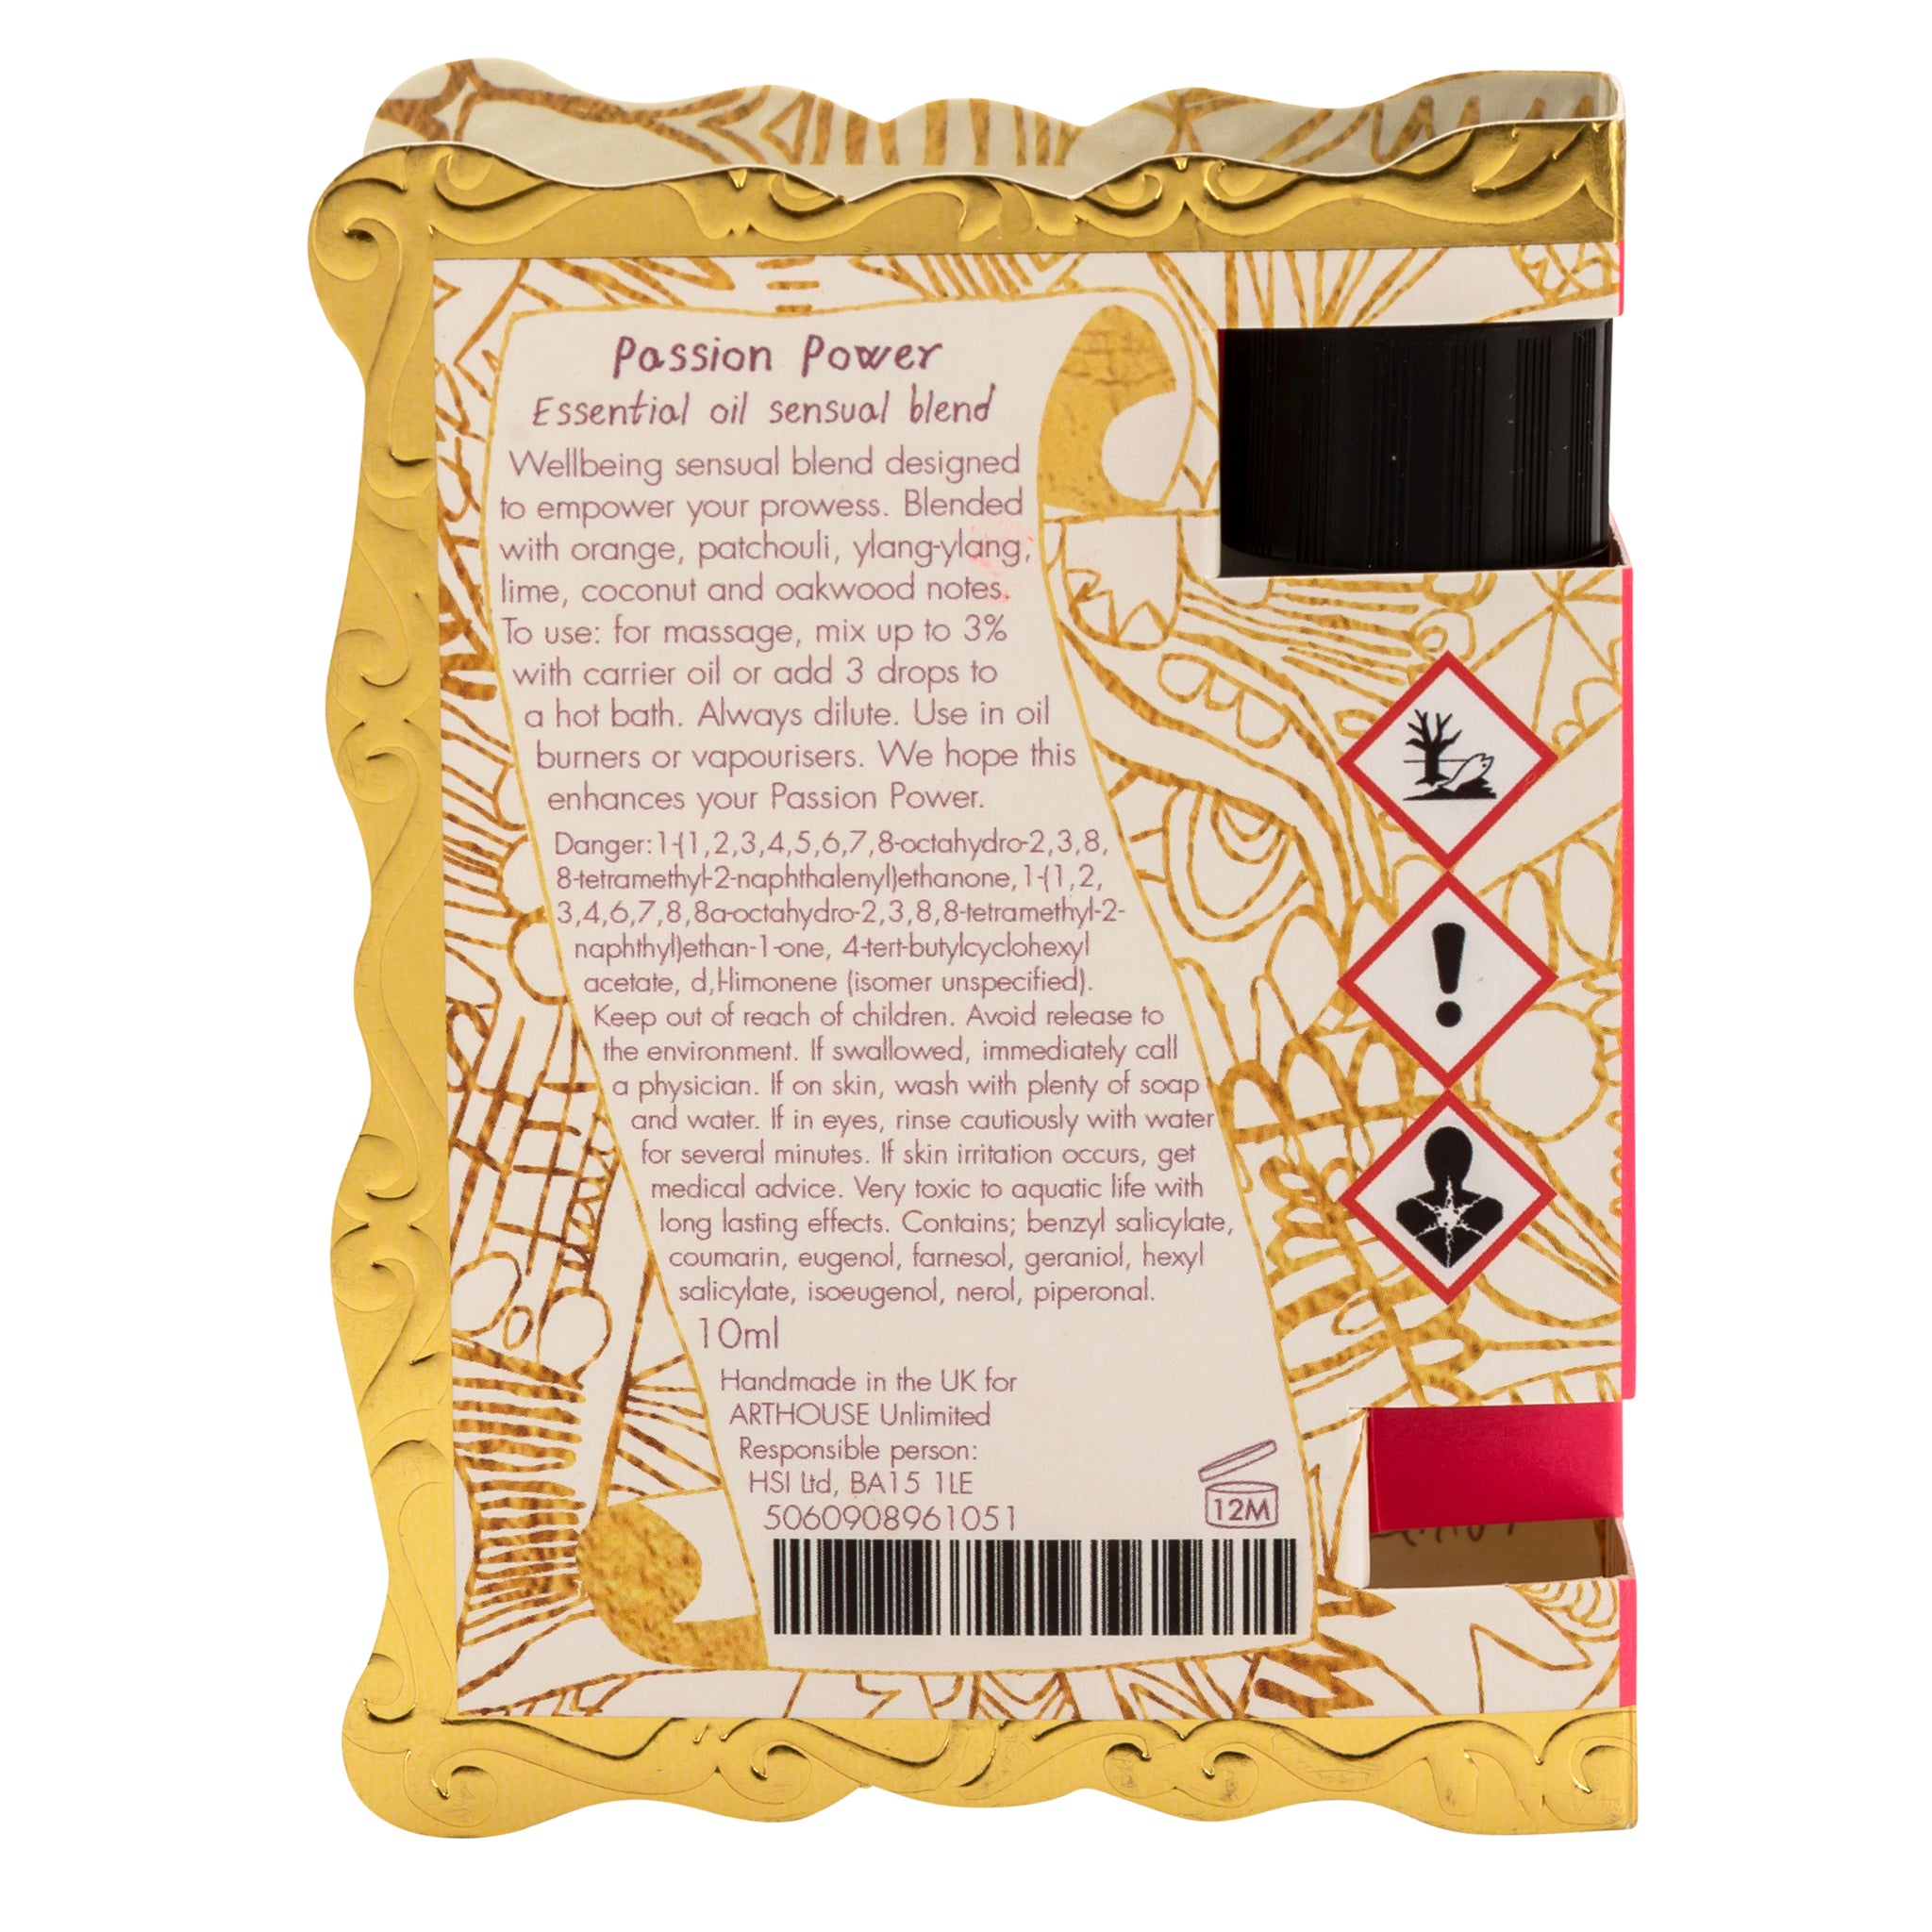 Back of packet of Passion Power, Well Being Essential Oil, Sensual Blend